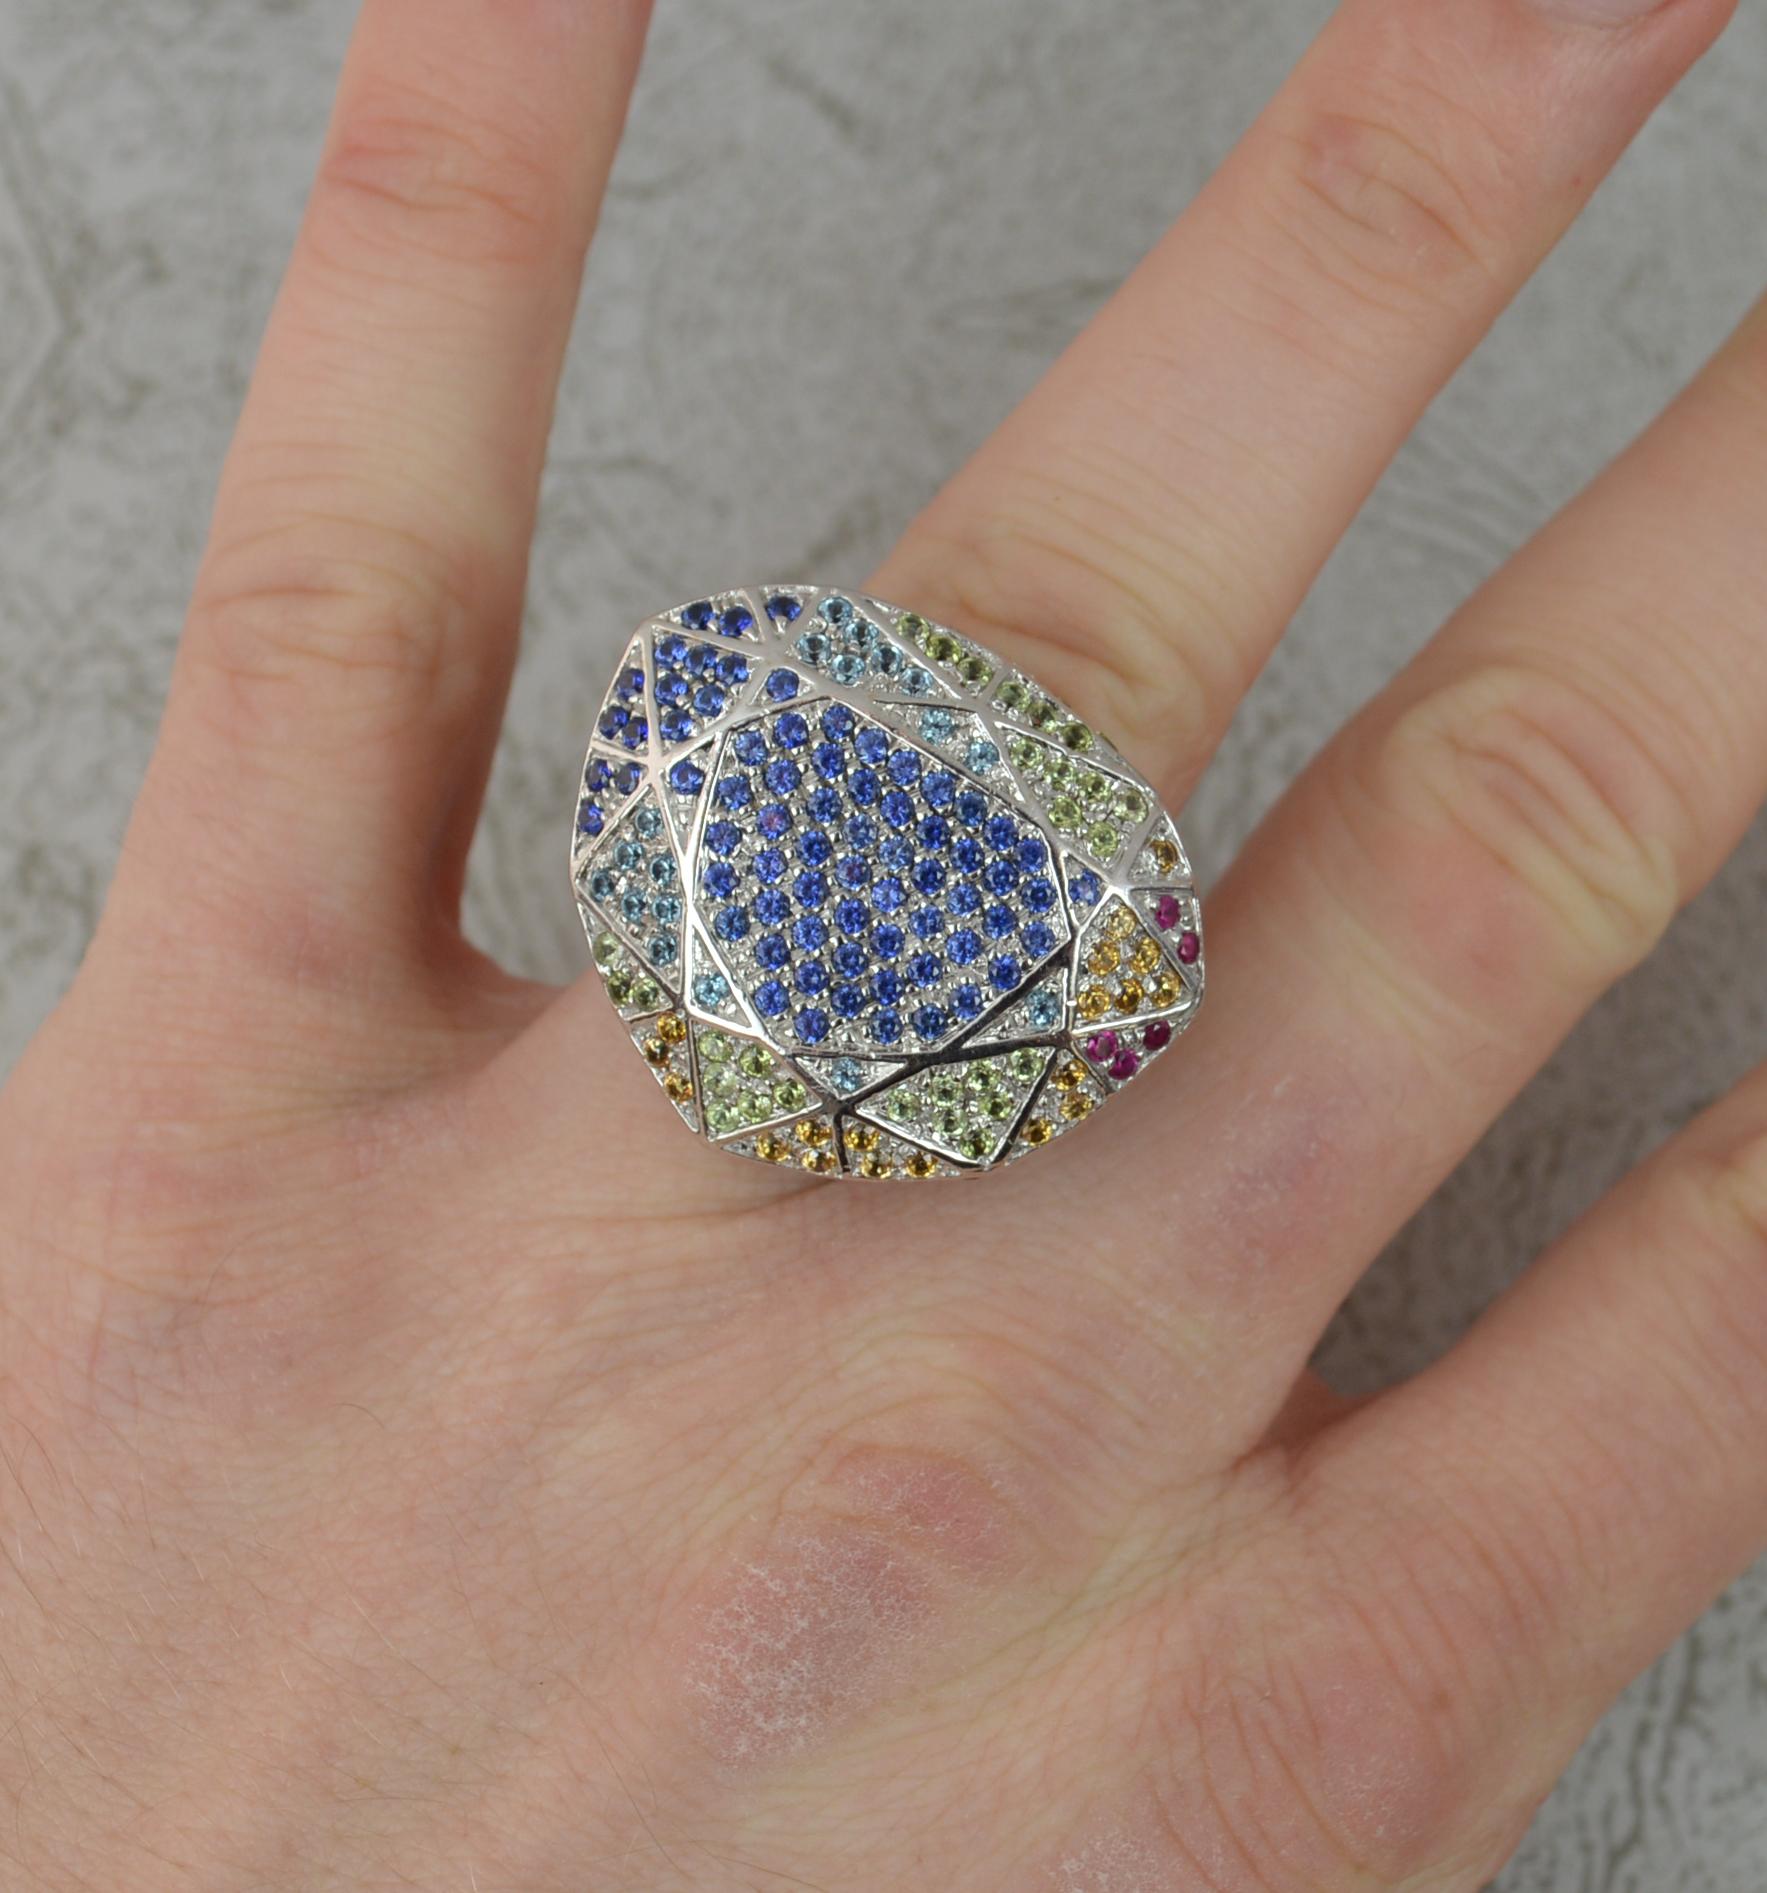 A stunning designer ring by H Stern and Diane Von Furstenberg.
Heavy, large and solid 18 carat white gold example.
Known as the 'Power' ring.
Multi faceted shaped head. Set with an array of natural, round brilliant cut sapphires of all colours.
30mm